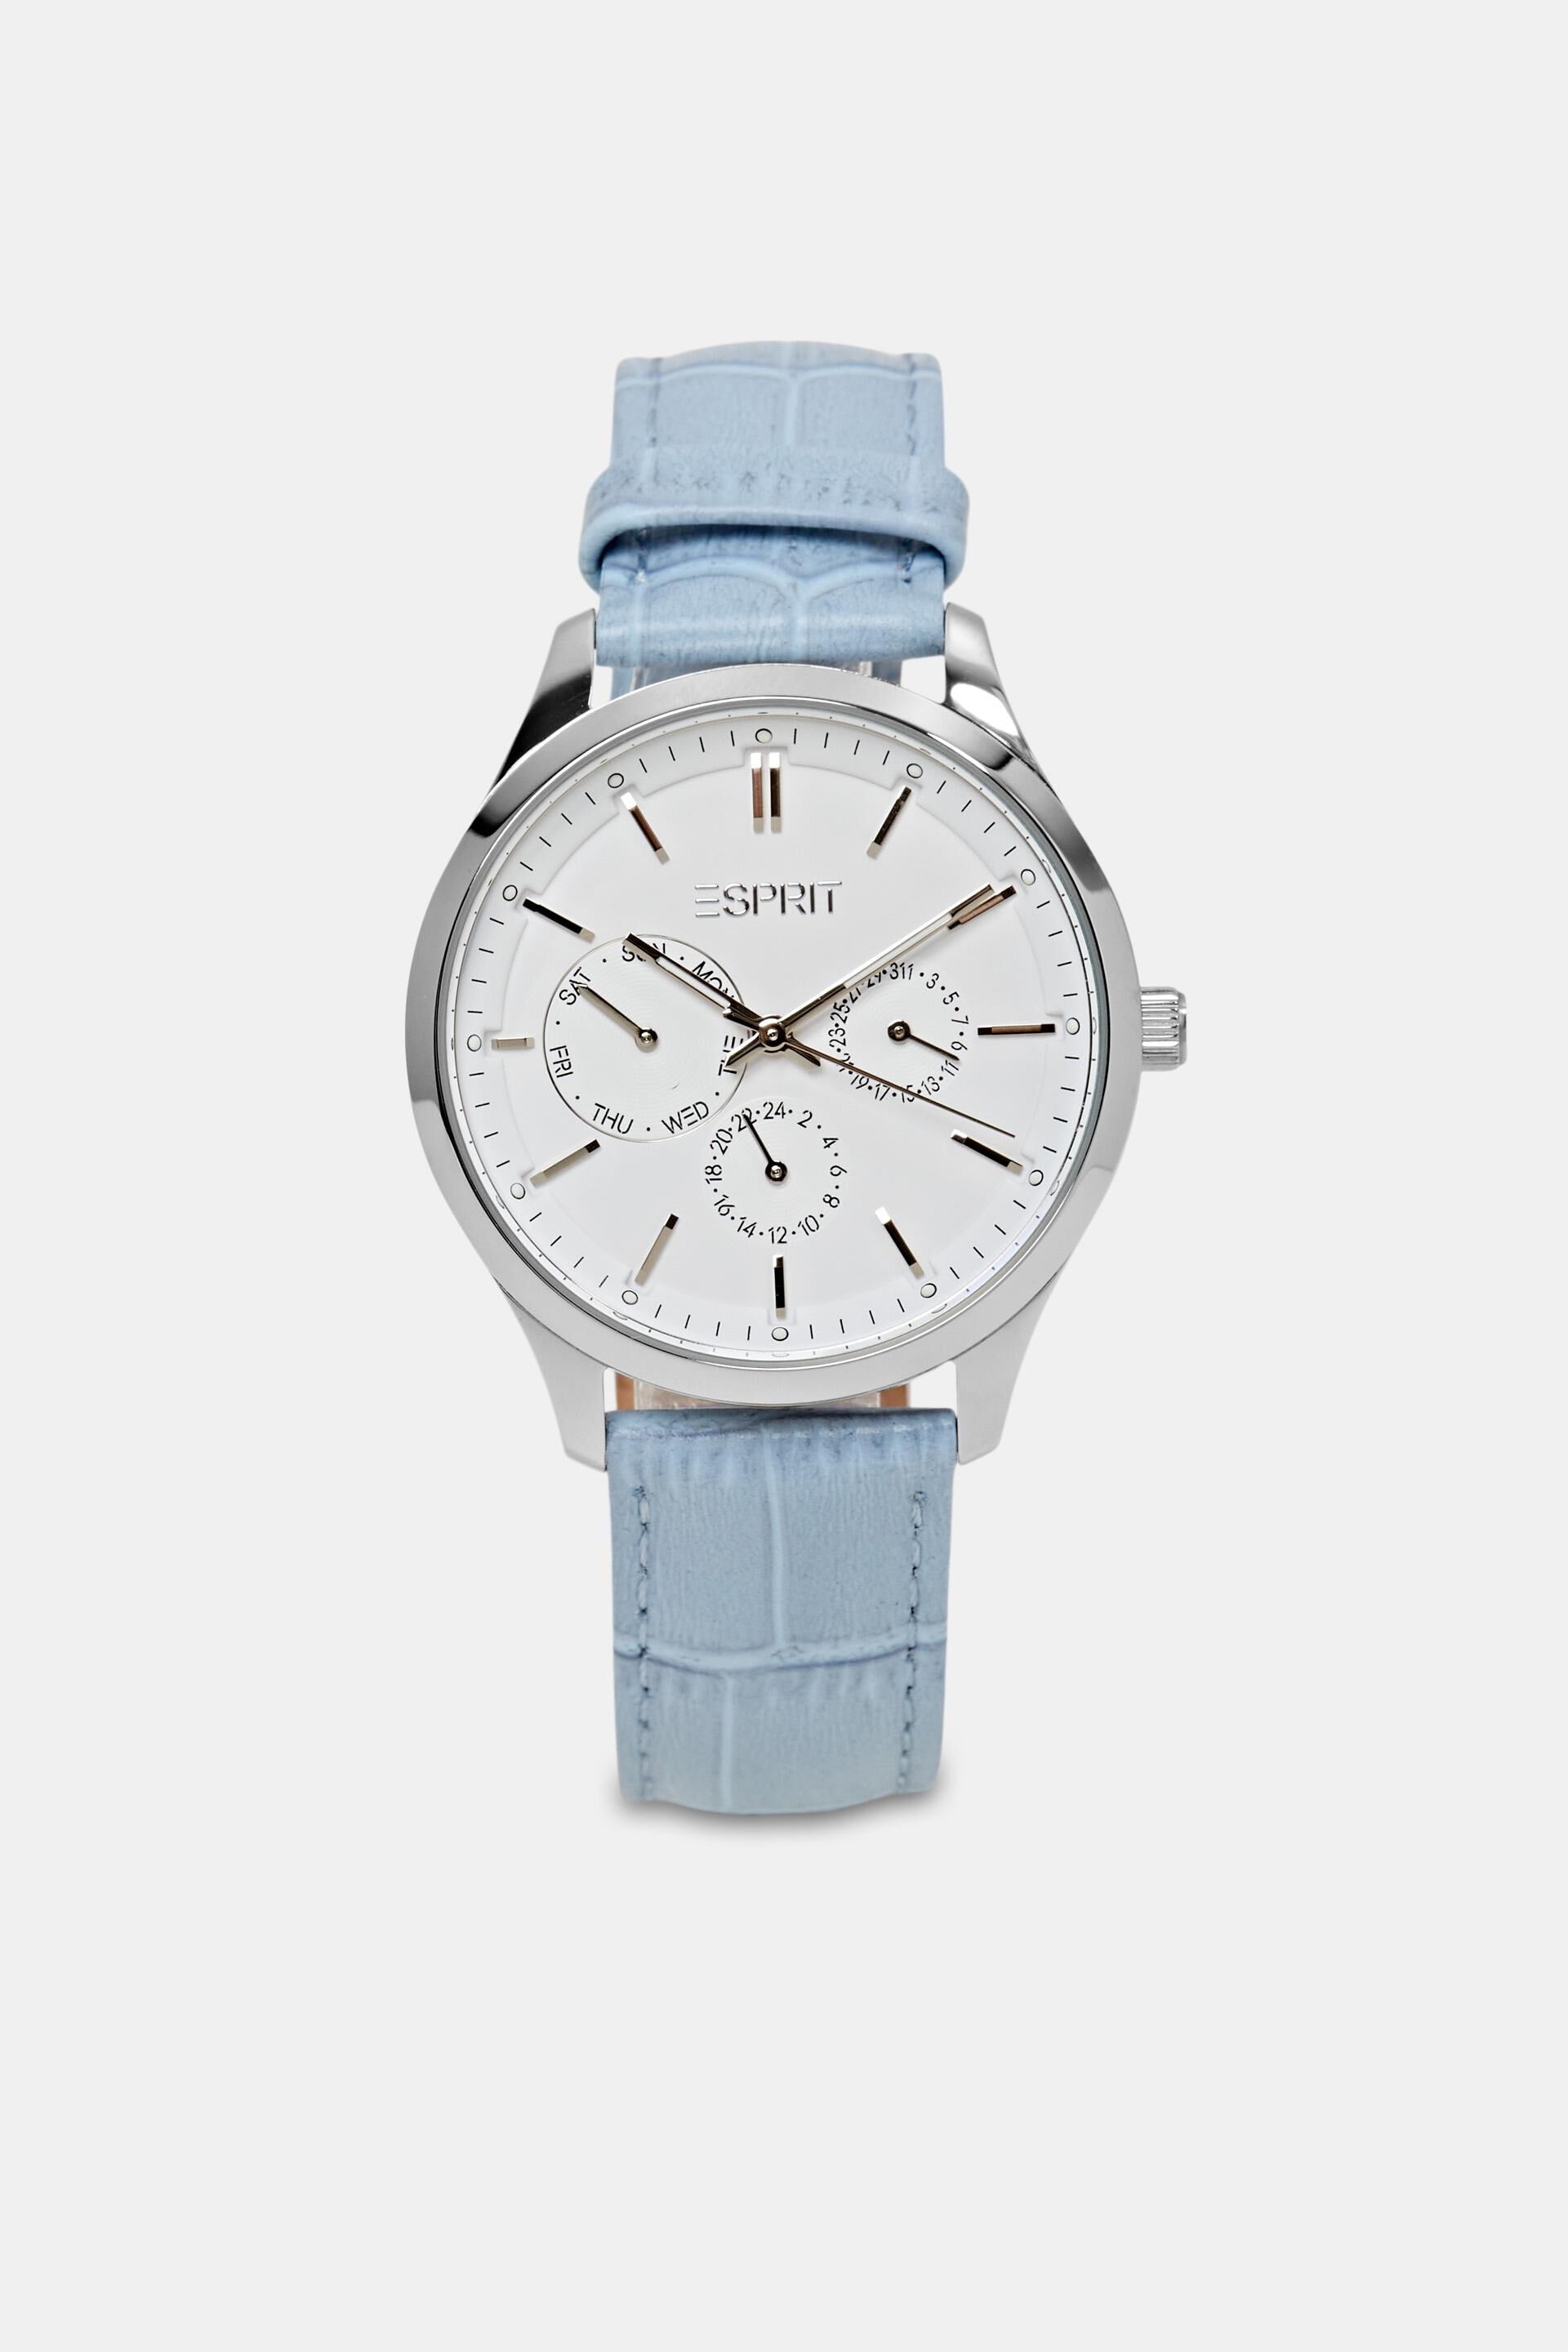 Esprit strap Multi-functional a watch with leather